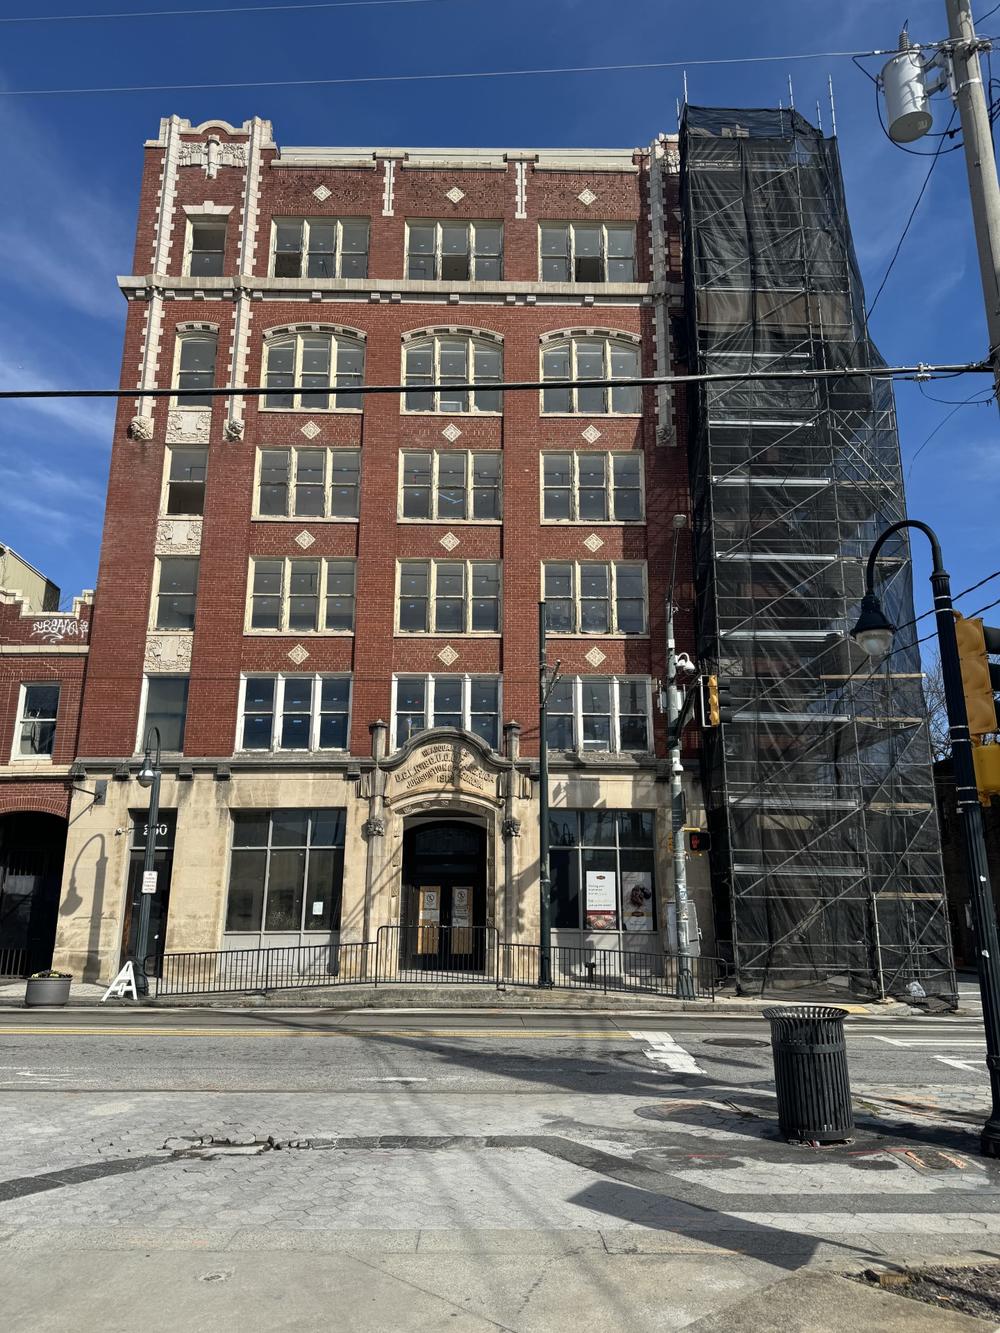 The Odd Fellows Building restoration is expected to be completed by April of 2025.